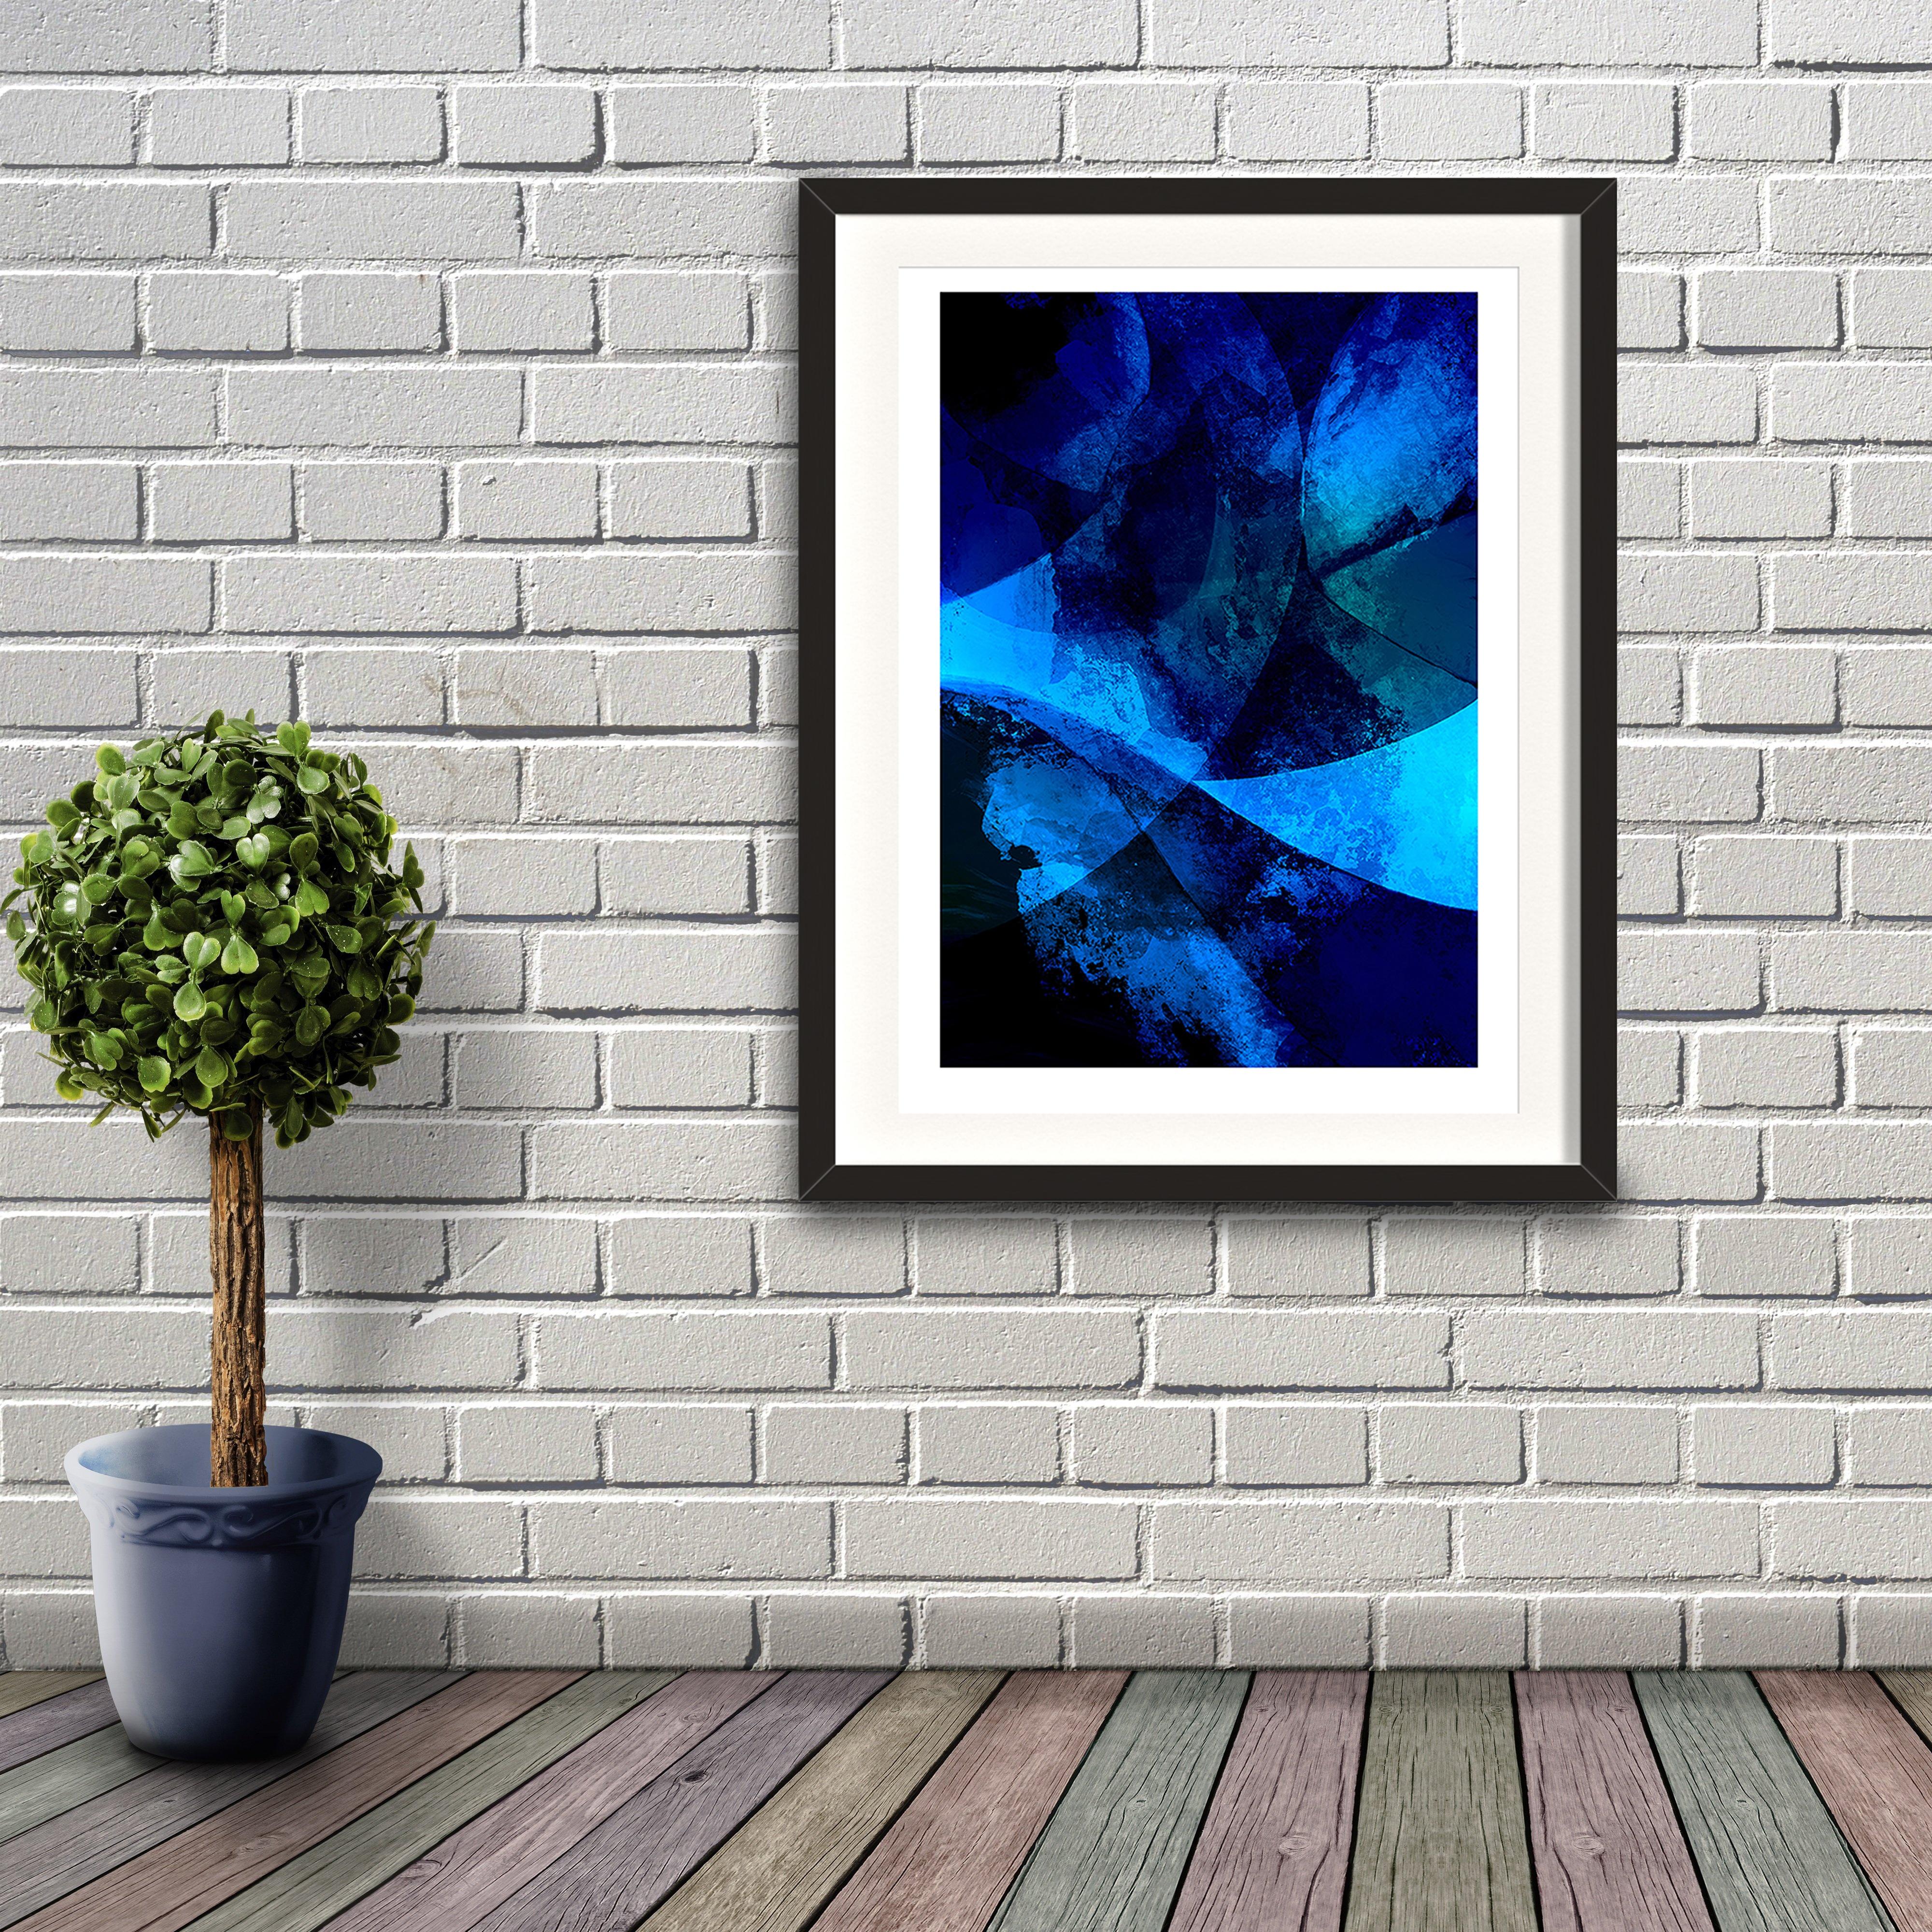 A digital painting called Cildhād Treeby Lily Bourne. Cildhād Tree is old English for Childhood Tree. The digital painting showing the branches of a mystical tree with lit lanterns hanging from the branches with a blue sky. Artwork shown in a black frame on a brick wall.